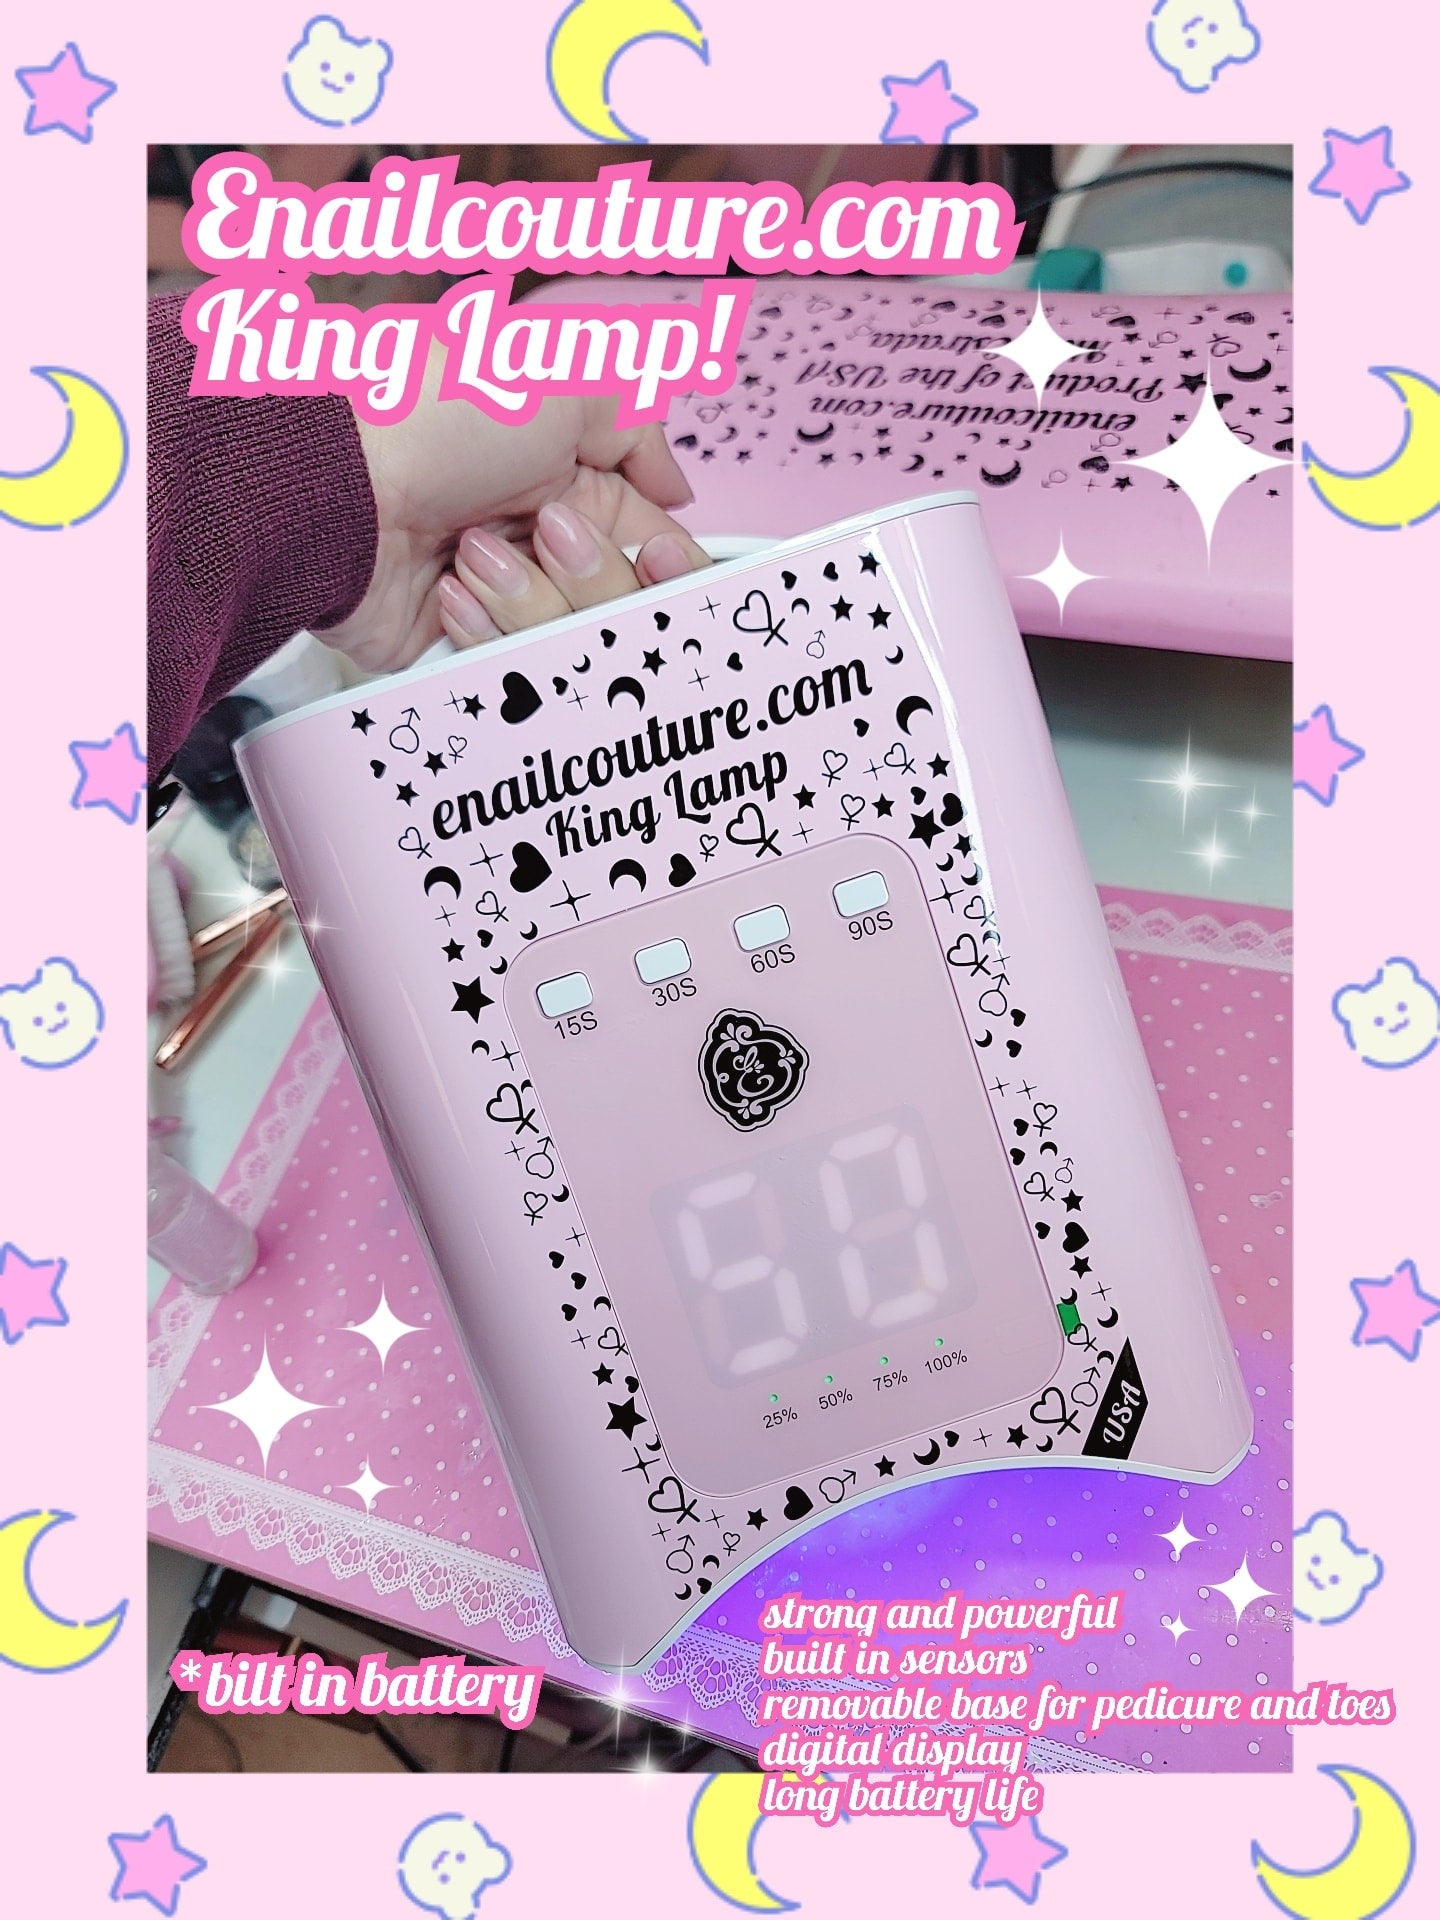 King Lamp ! (112W Rechargeable UV LED Nail Lamp, Faster Wireless Nail Dryer Gel Polish Light 42 Beads & Portable Handle, Professional Curing Lamp For Fingernail and Toenail, Auto Sensor & Quick Dry Nail Machine)